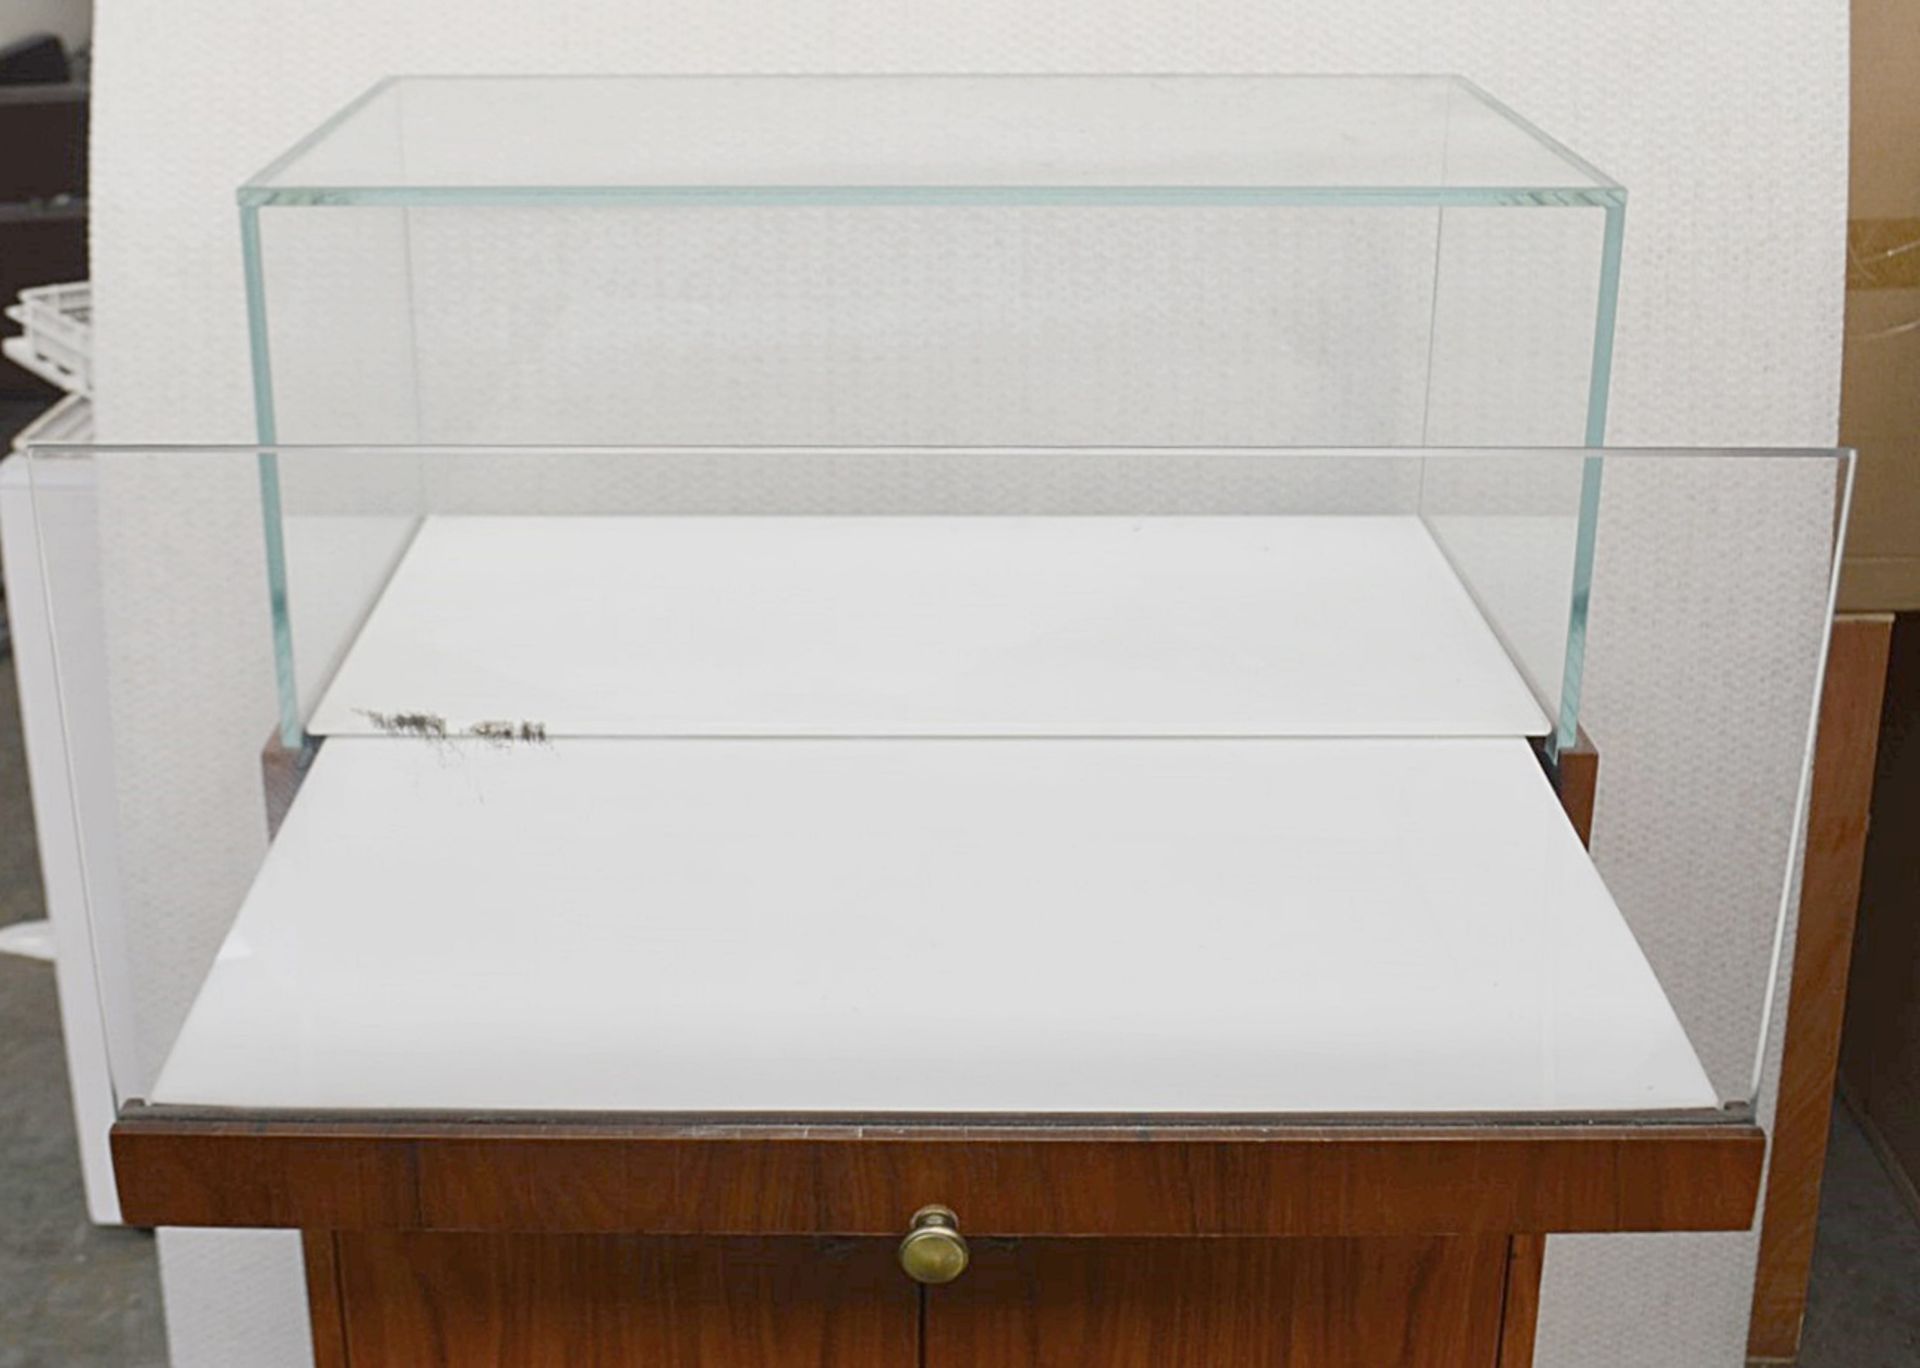 1 x 2-Door Jewellery Display Unit With Slide-apart Glass Top - Dimensions: H120 x W70 x D40cm - Ref: - Image 6 of 6